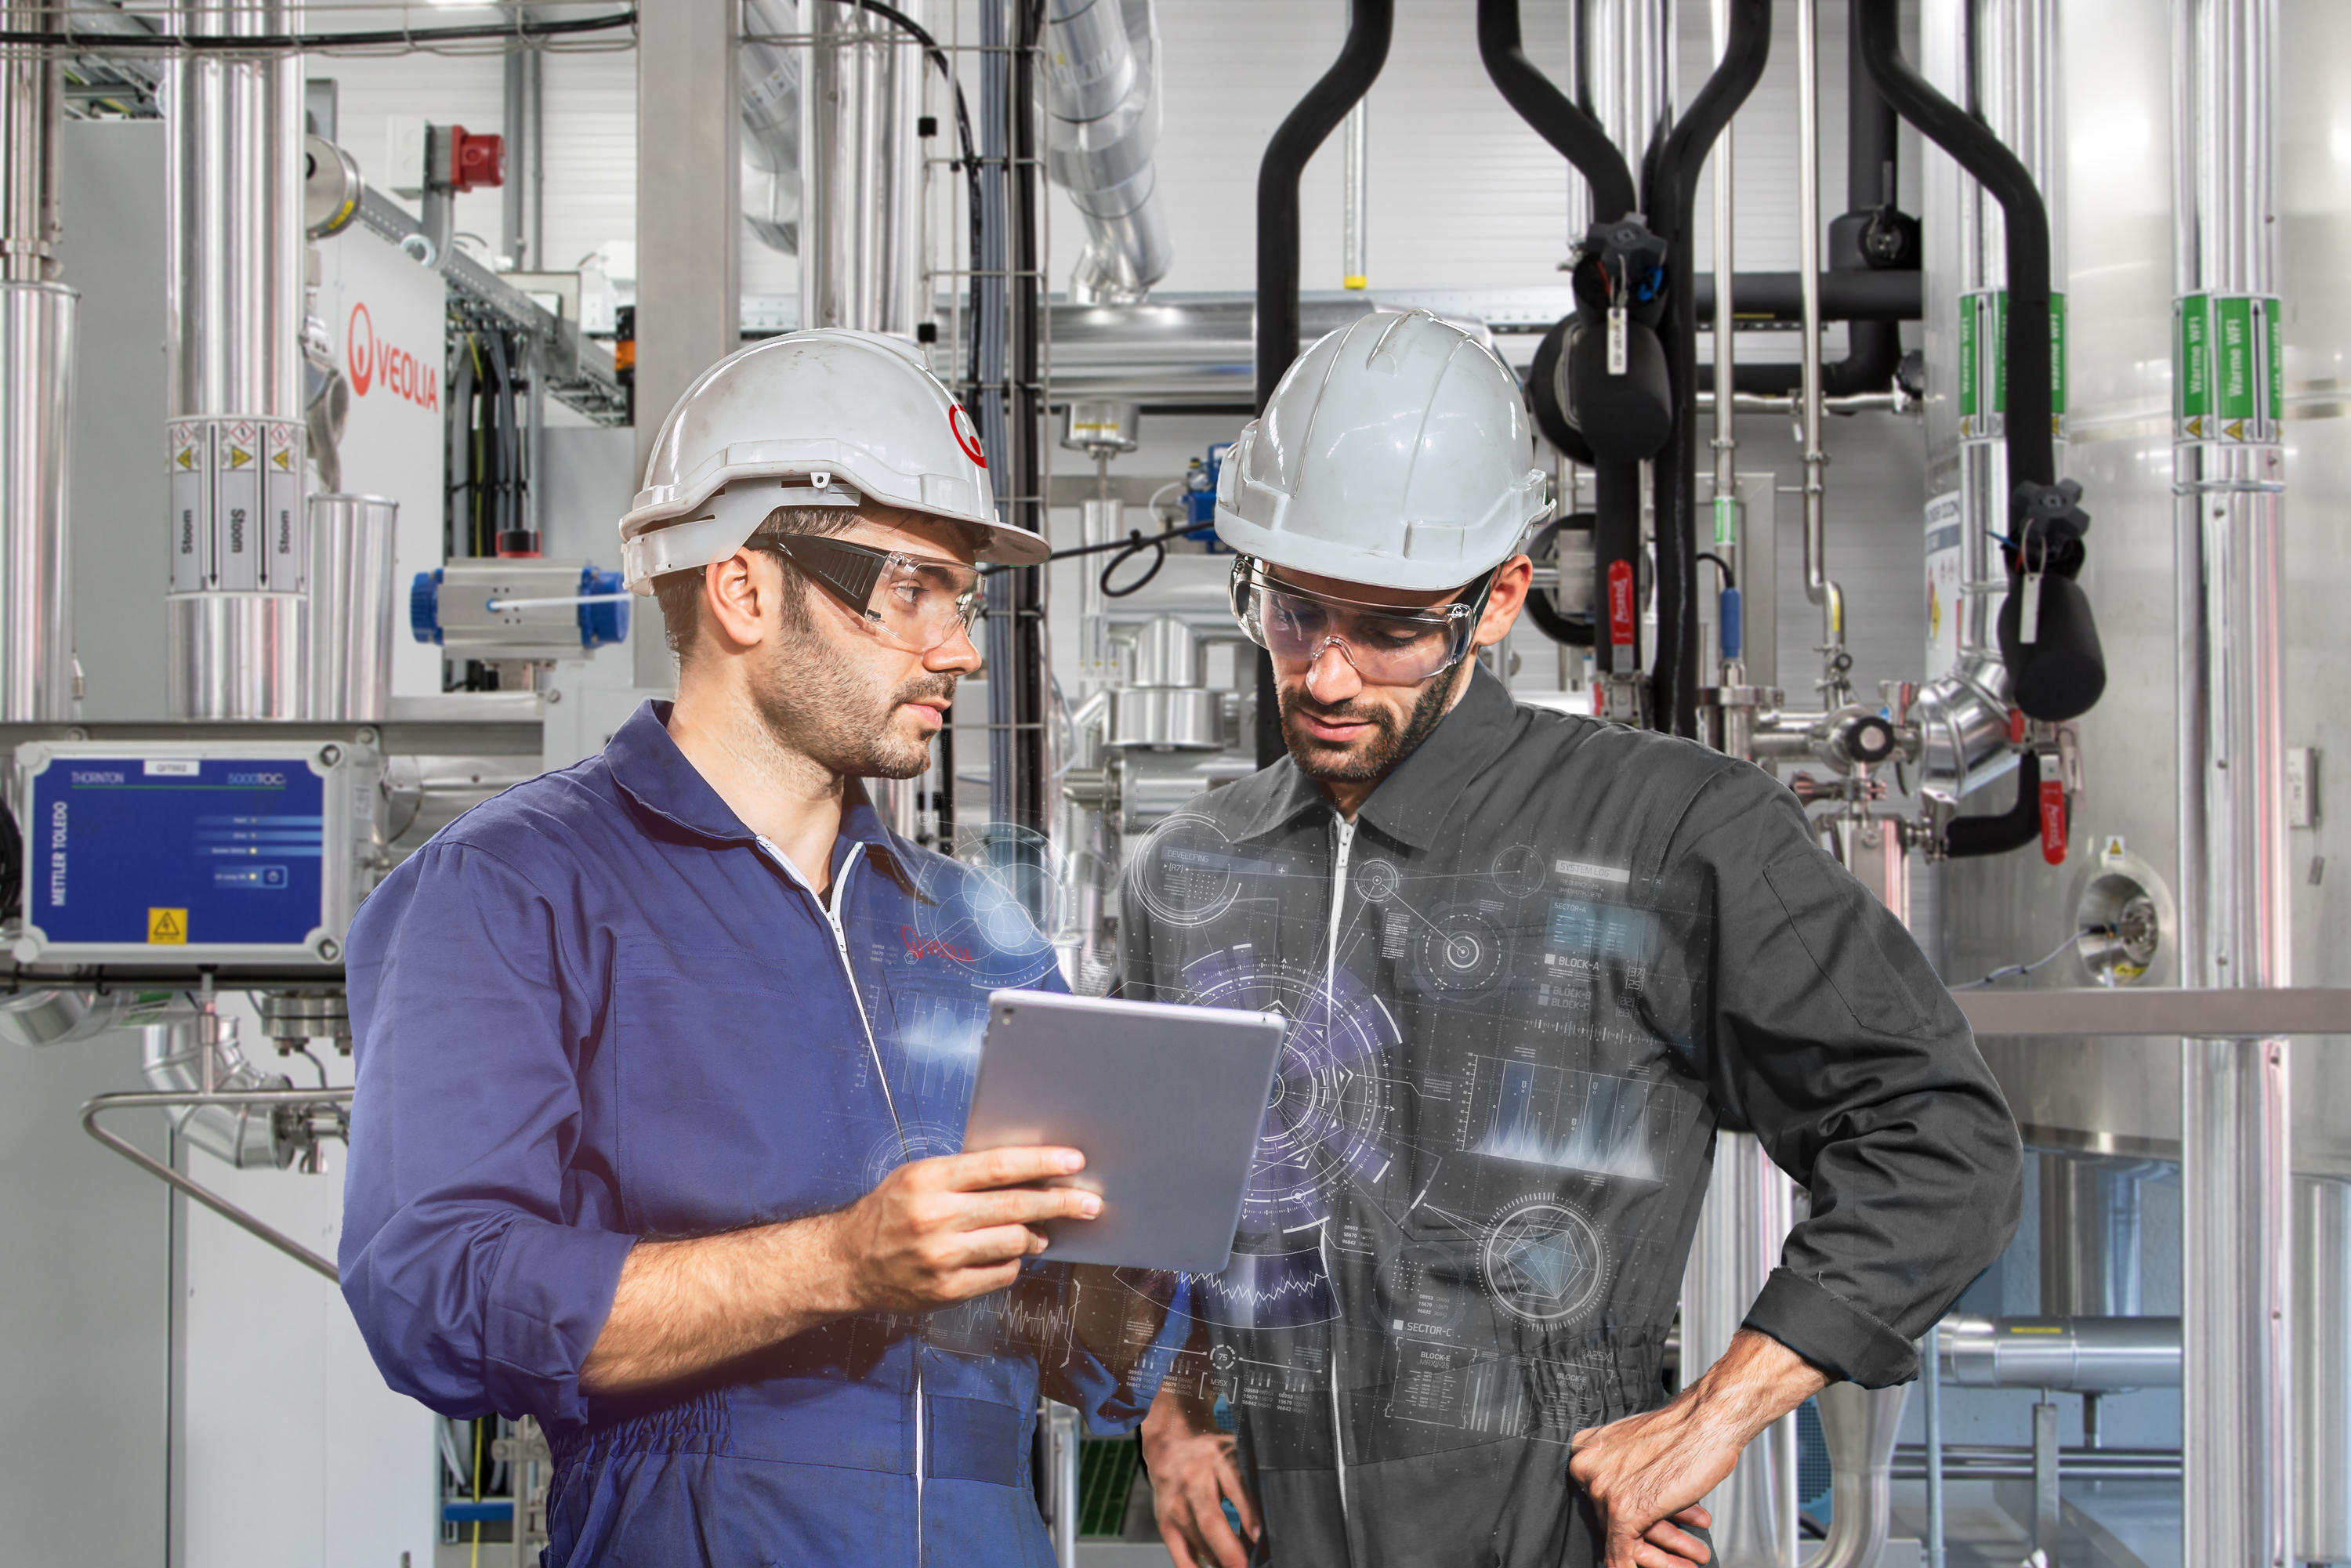 Two man wearing safety helmets, glasses and jumpsuits, holding a tablet, talking, working in a factory.